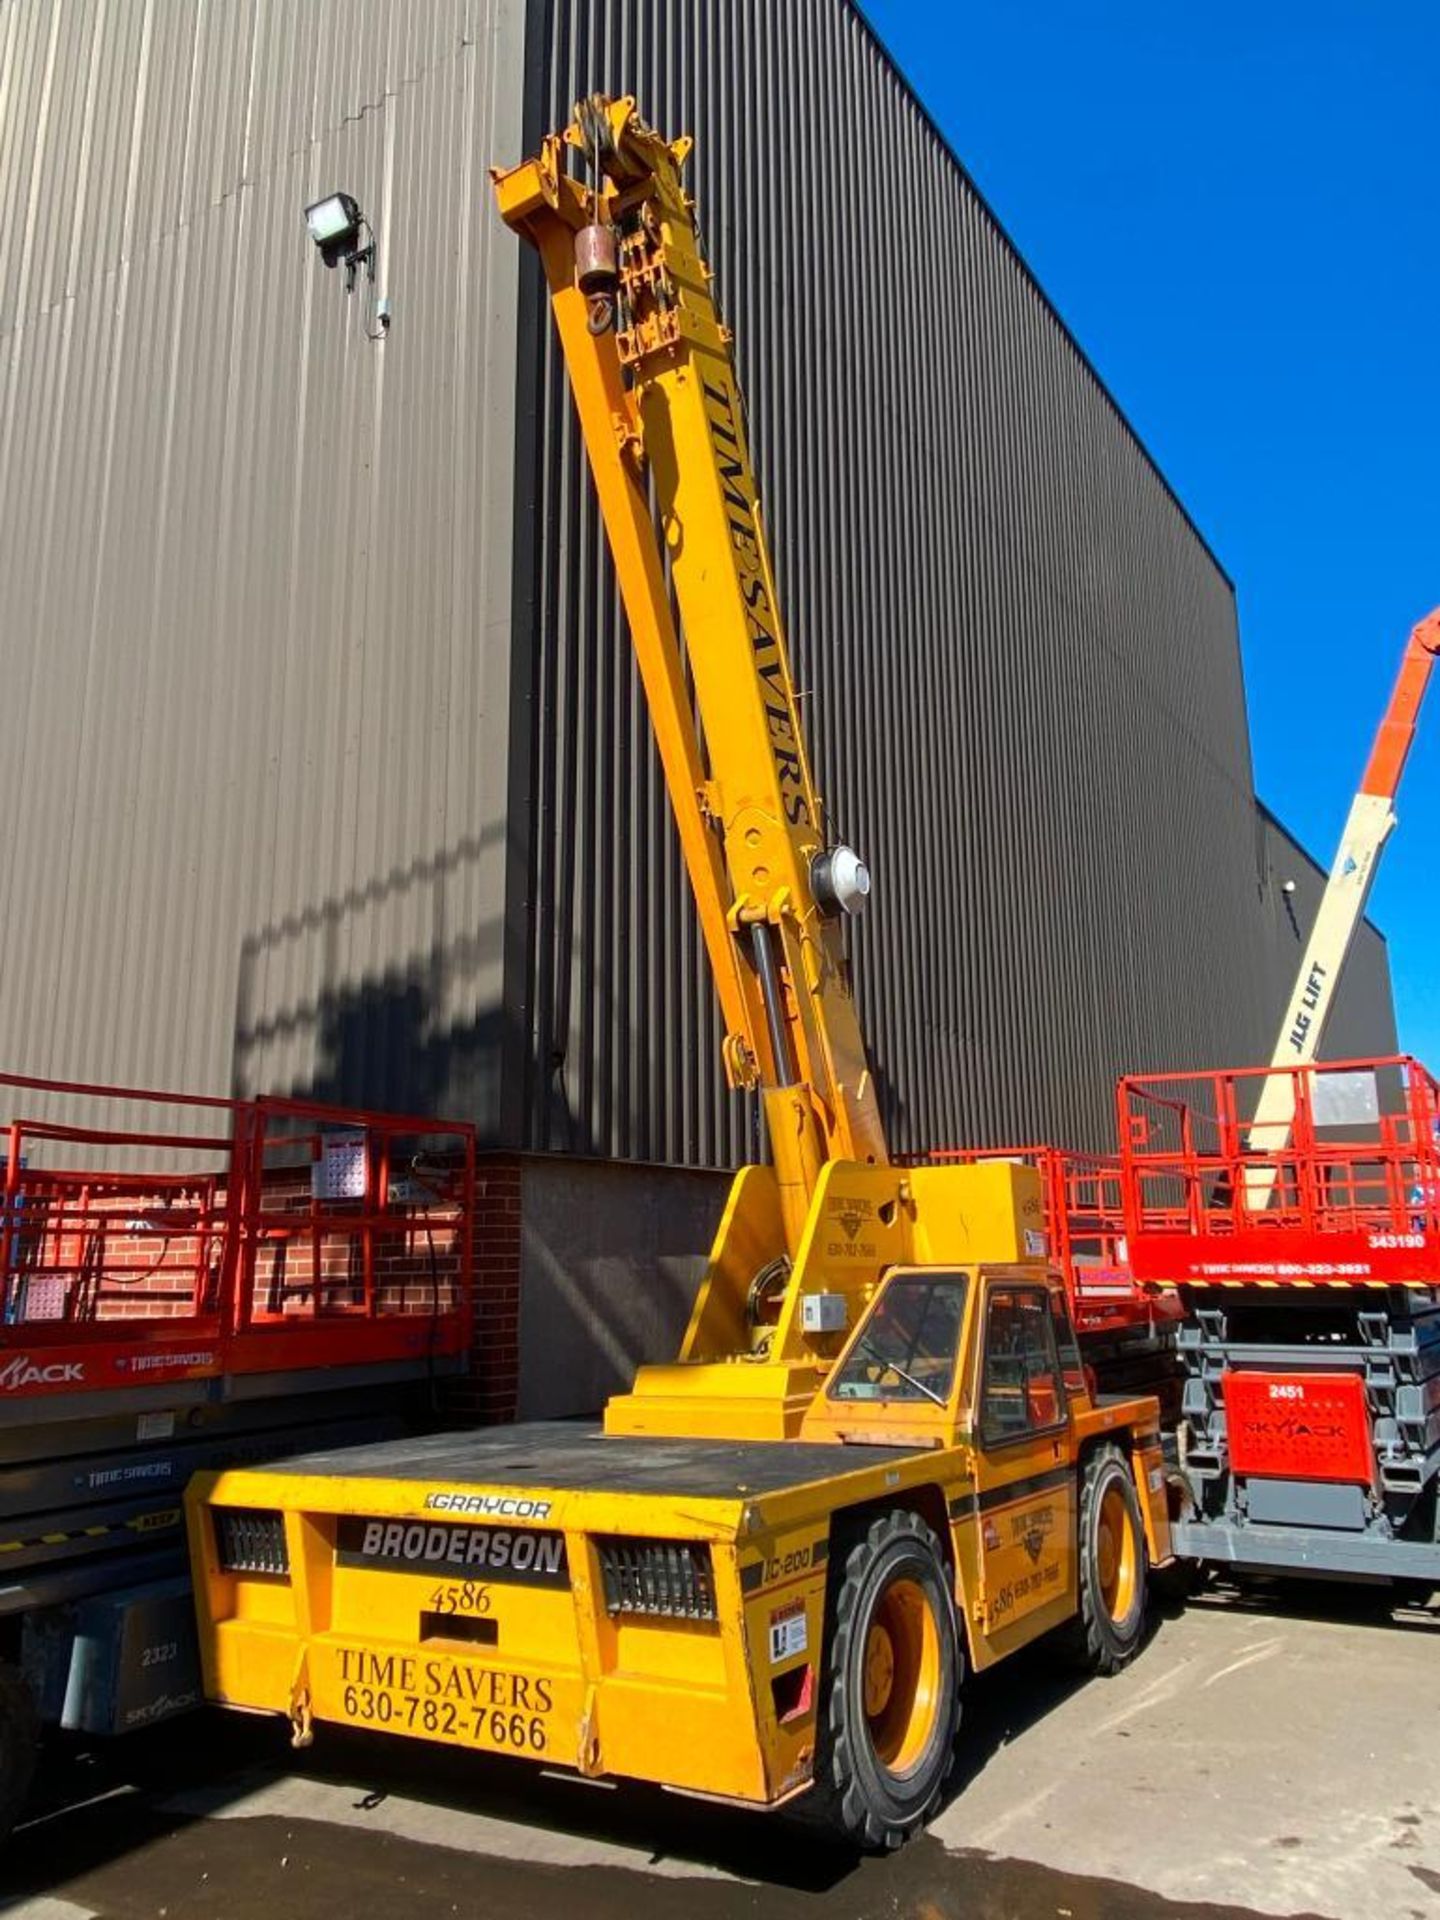 Broderson IC-200-3F Rough Terrain Carry Deck Crane (S/N 182274, Year 2008), with 15-Ton Capacity, - Image 2 of 10